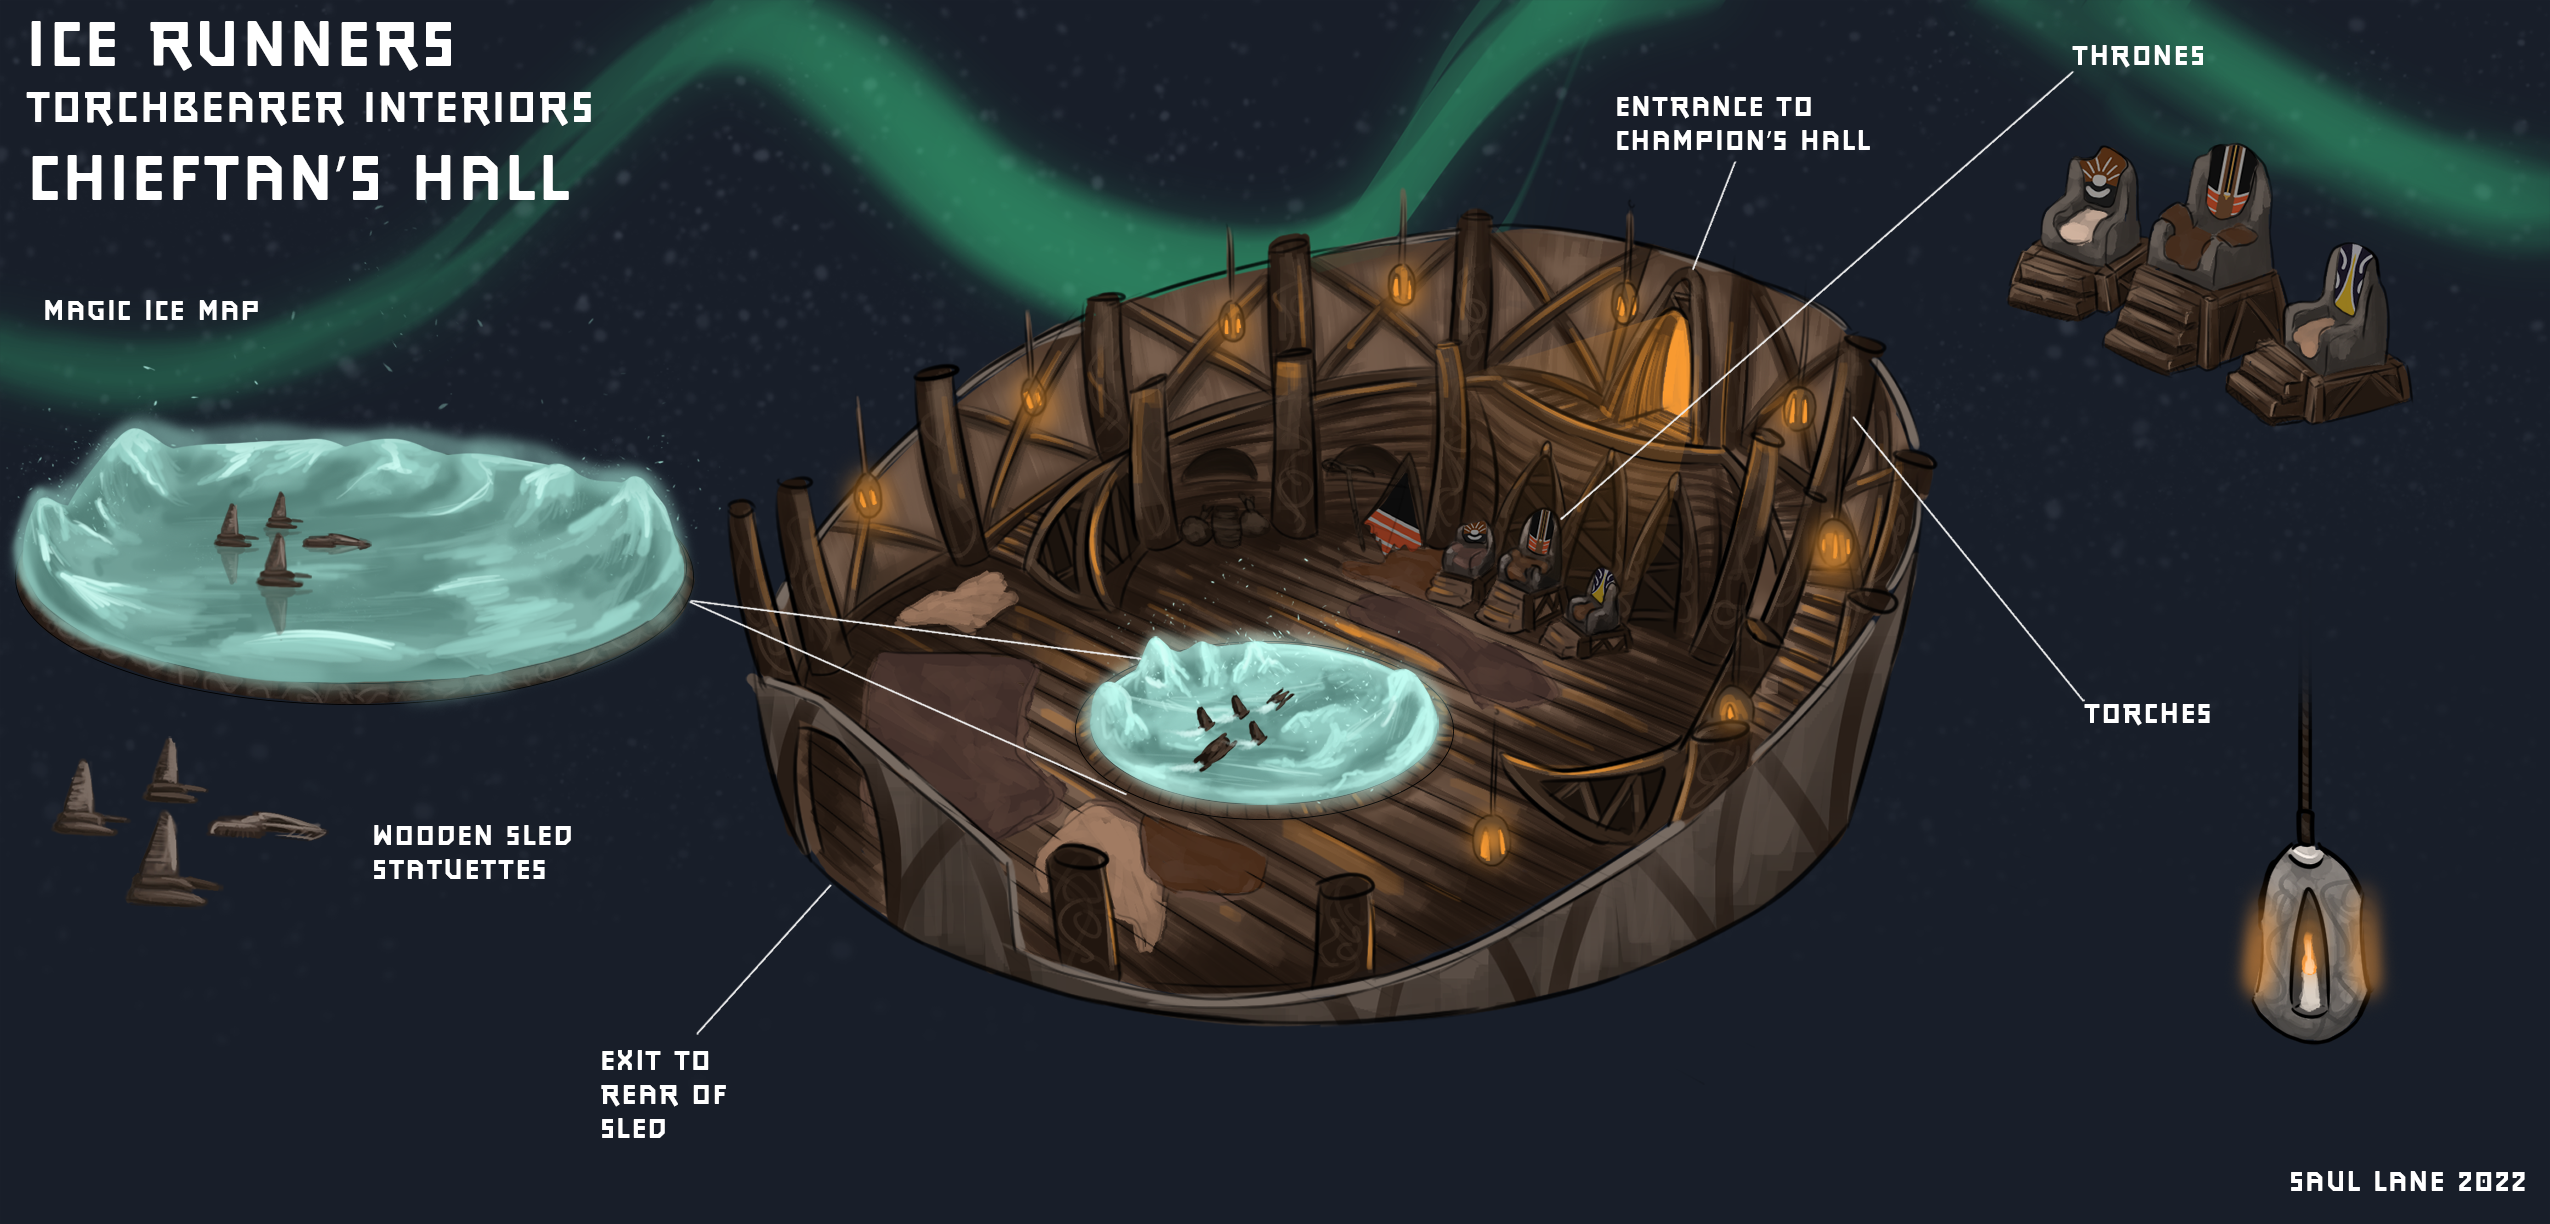 An isometric cut-away view of a tall, large, dimly-lit tent. A blue magical ice map glows in the center of the tent, with a set of three thrones sitting in front of it.